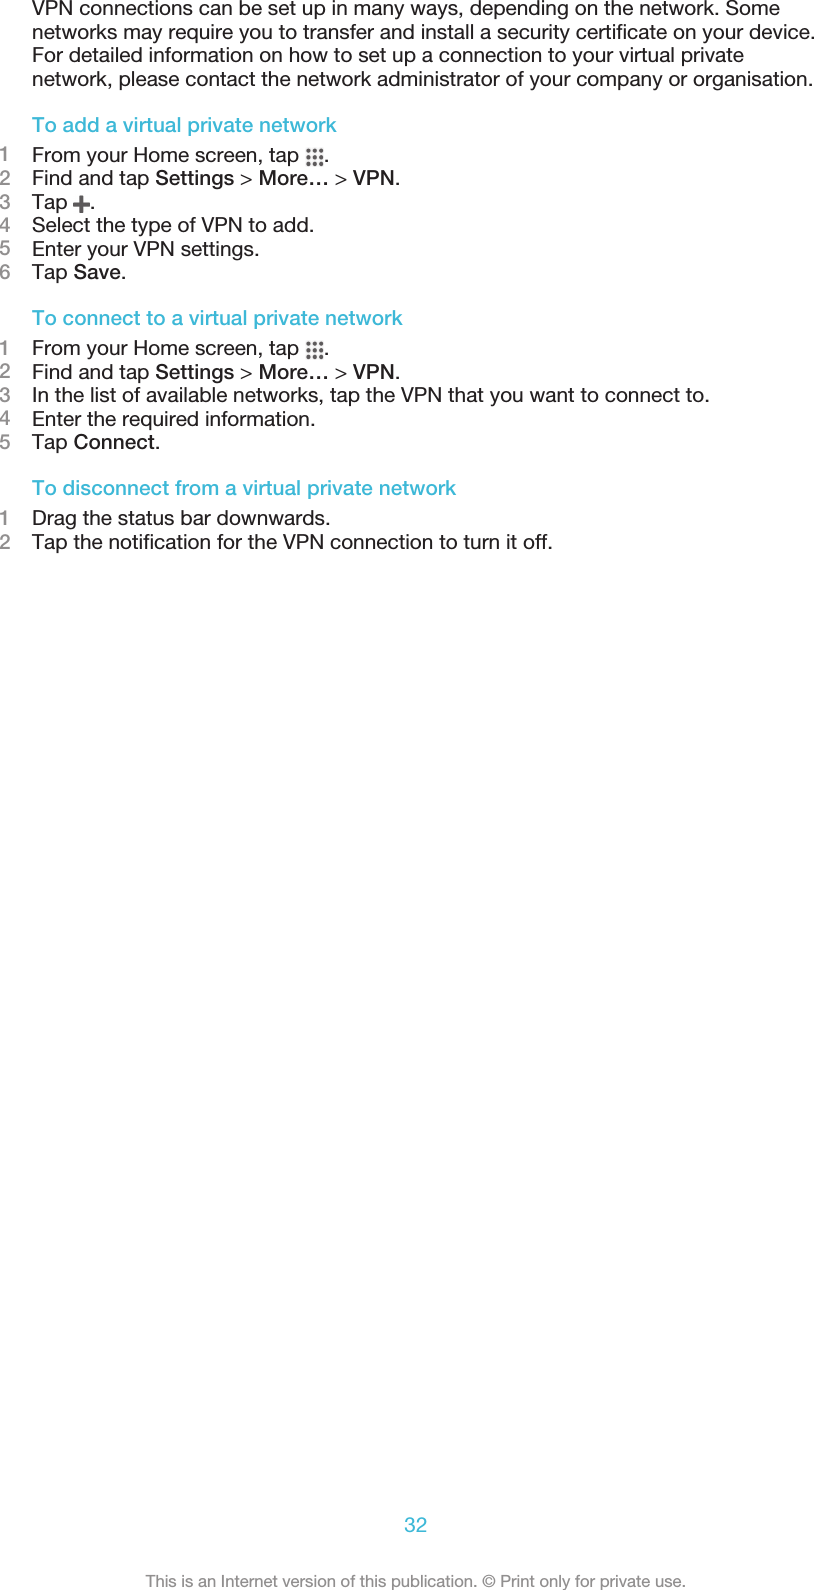 VPN connections can be set up in many ways, depending on the network. Somenetworks may require you to transfer and install a security certificate on your device.For detailed information on how to set up a connection to your virtual privatenetwork, please contact the network administrator of your company or organisation.To add a virtual private network1From your Home screen, tap  .2Find and tap Settings &gt; More… &gt; VPN.3Tap  .4Select the type of VPN to add.5Enter your VPN settings.6Tap Save.To connect to a virtual private network1From your Home screen, tap  .2Find and tap Settings &gt; More… &gt; VPN.3In the list of available networks, tap the VPN that you want to connect to.4Enter the required information.5Tap Connect.To disconnect from a virtual private network1Drag the status bar downwards.2Tap the notification for the VPN connection to turn it off.32This is an Internet version of this publication. © Print only for private use.